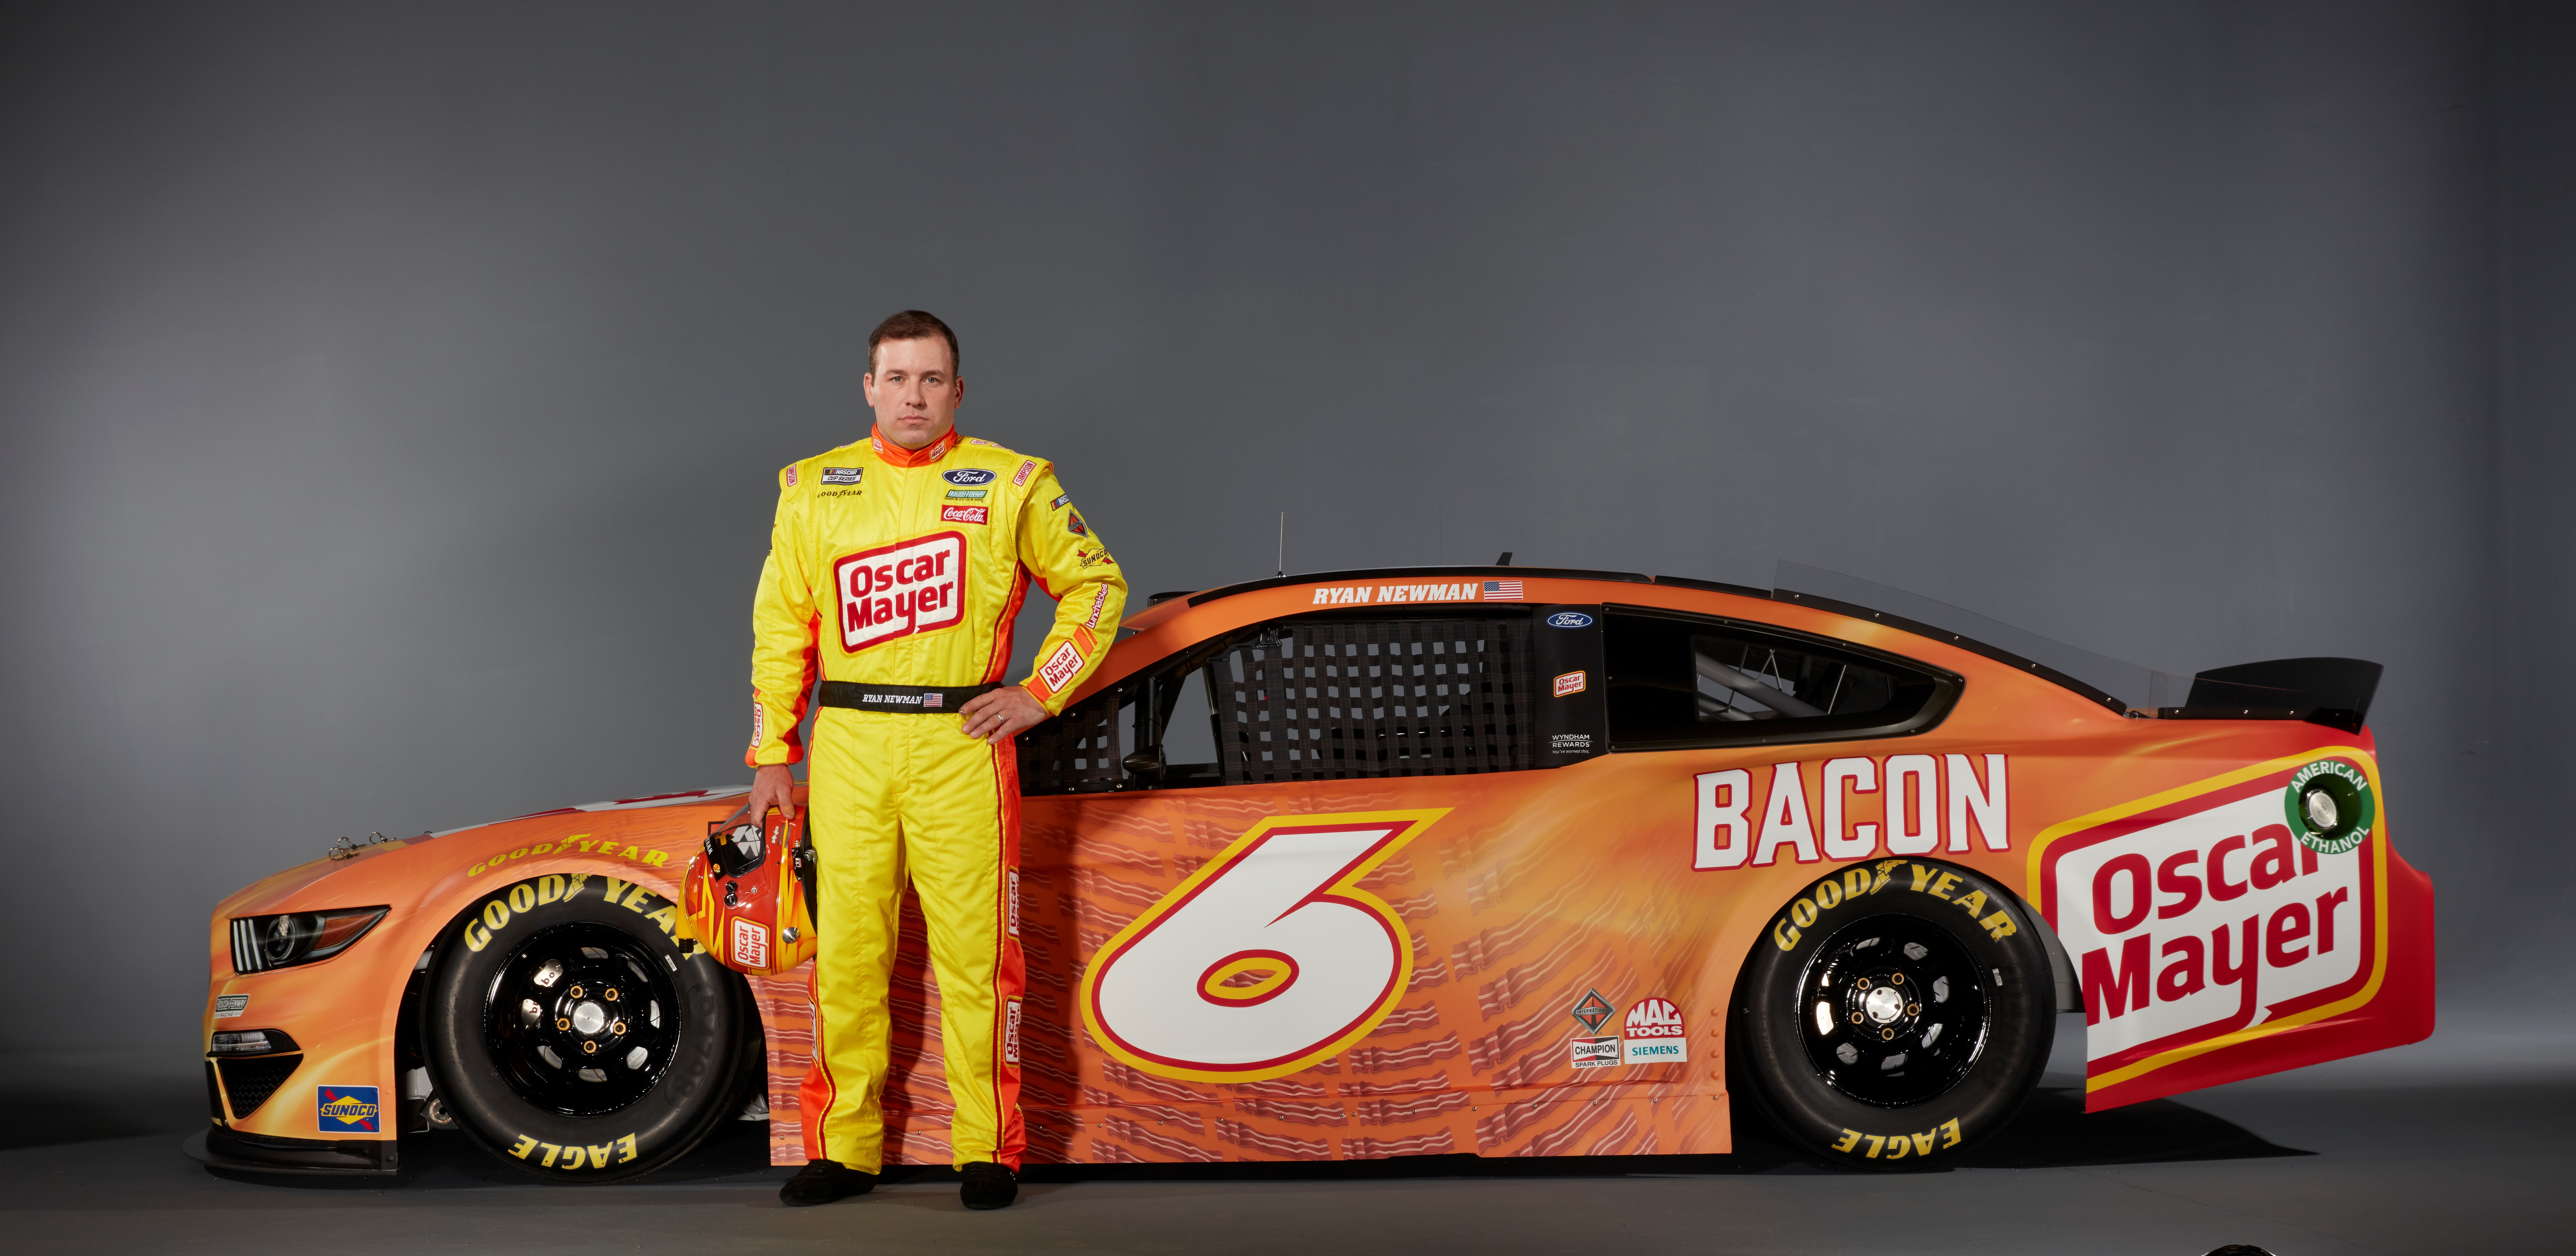 Newman, Oscar Mayer Team Up for All-In Challenge